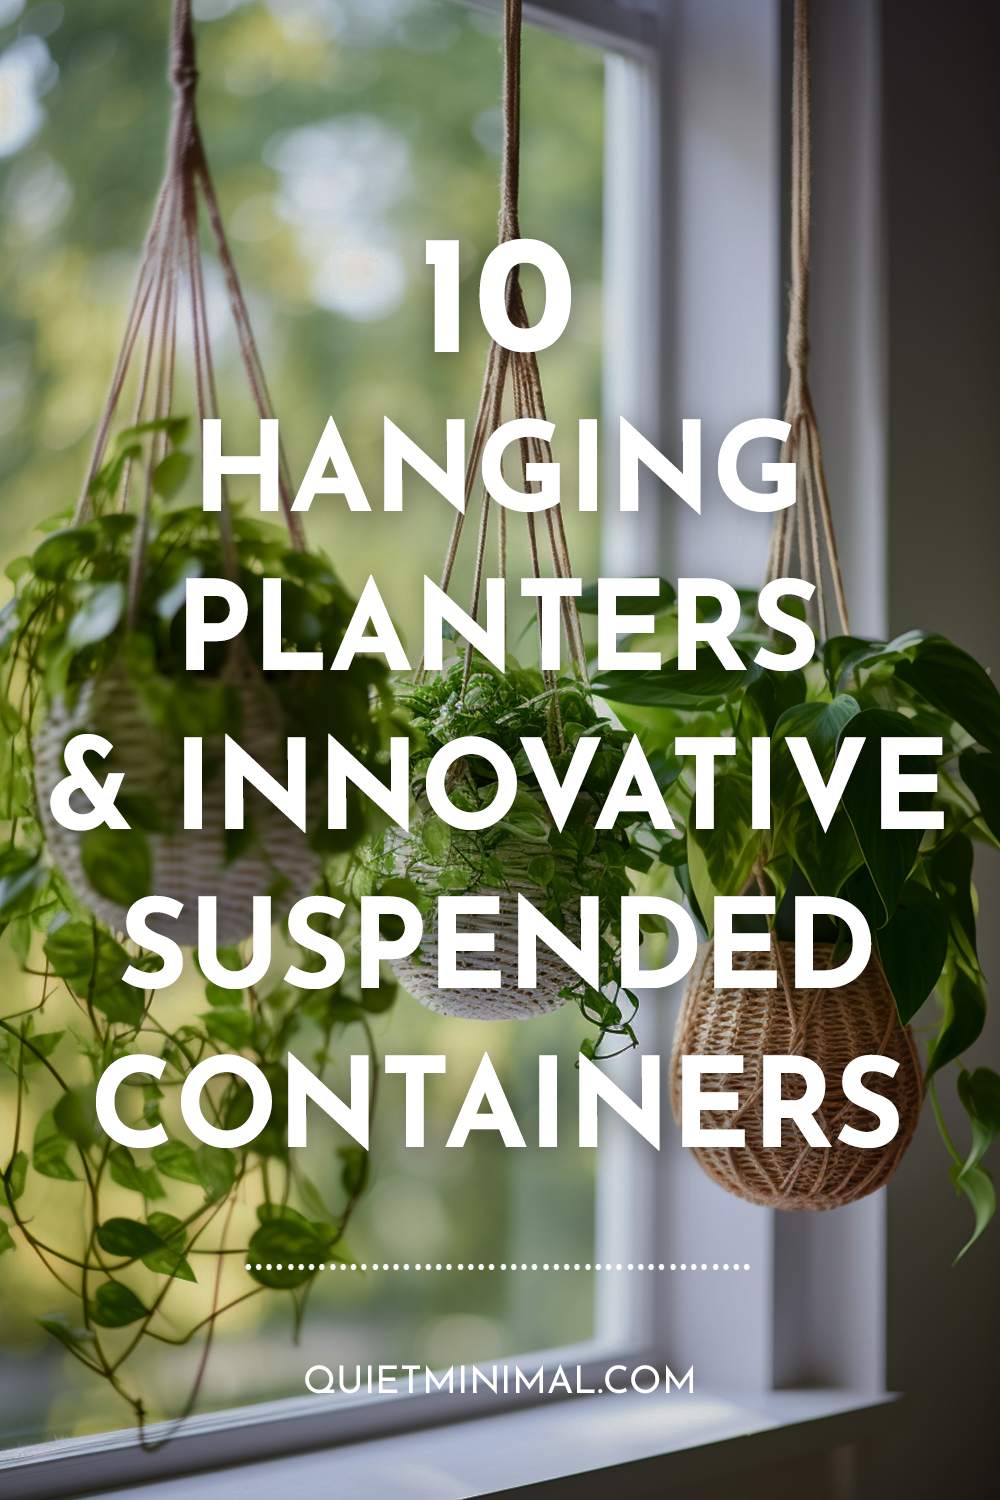 The collection features 10 hanging planters and innovative suspended containers, offering a unique way to display your greenery.